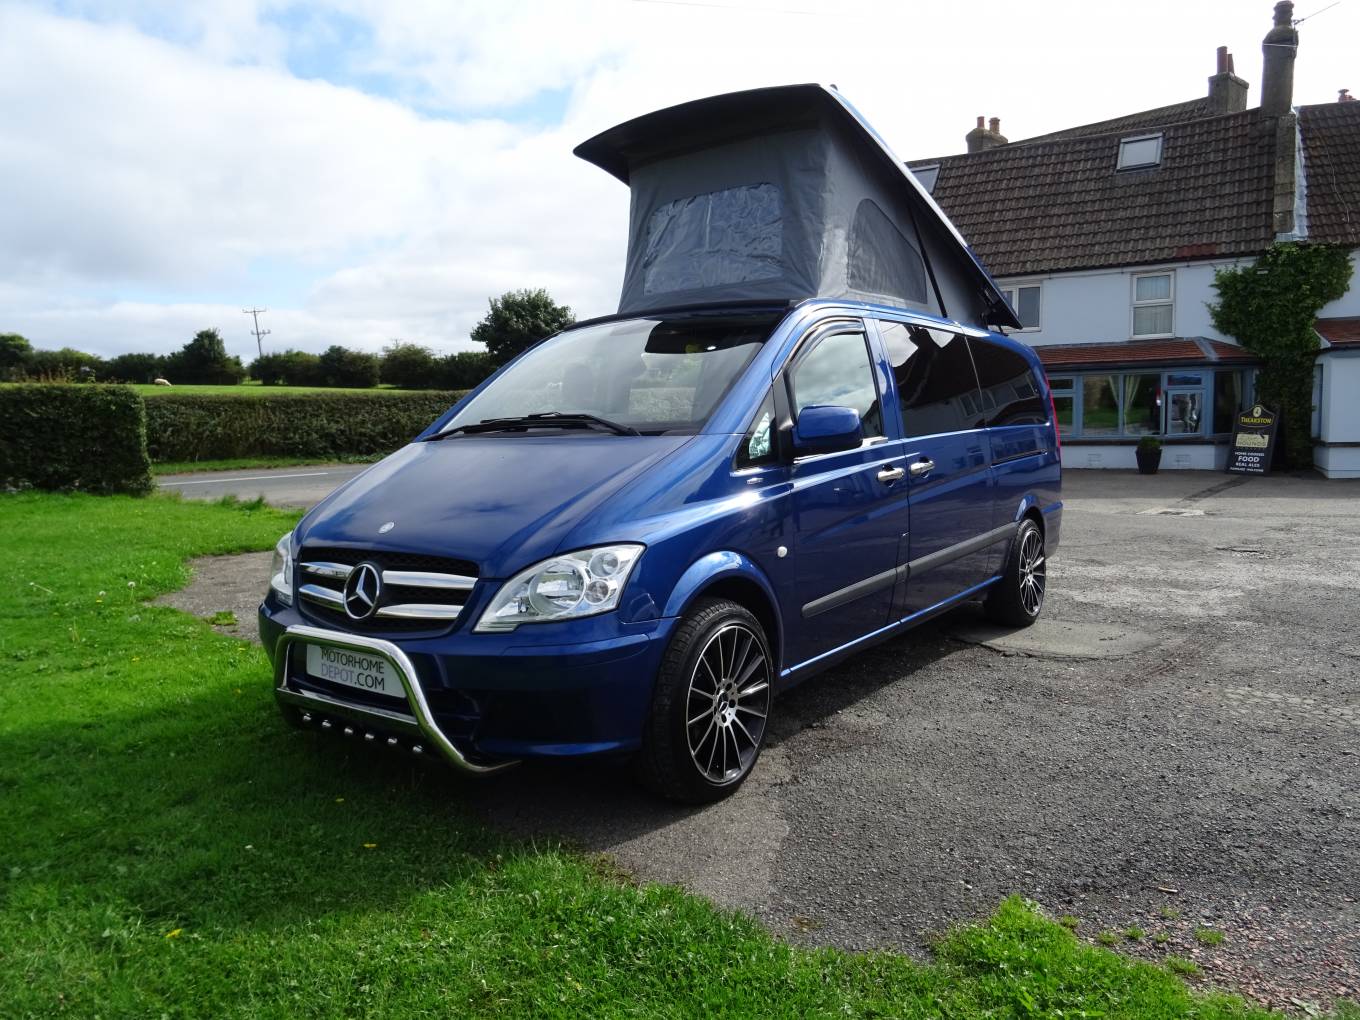 Newly converted, low mileage Mercedes Viano Campervan